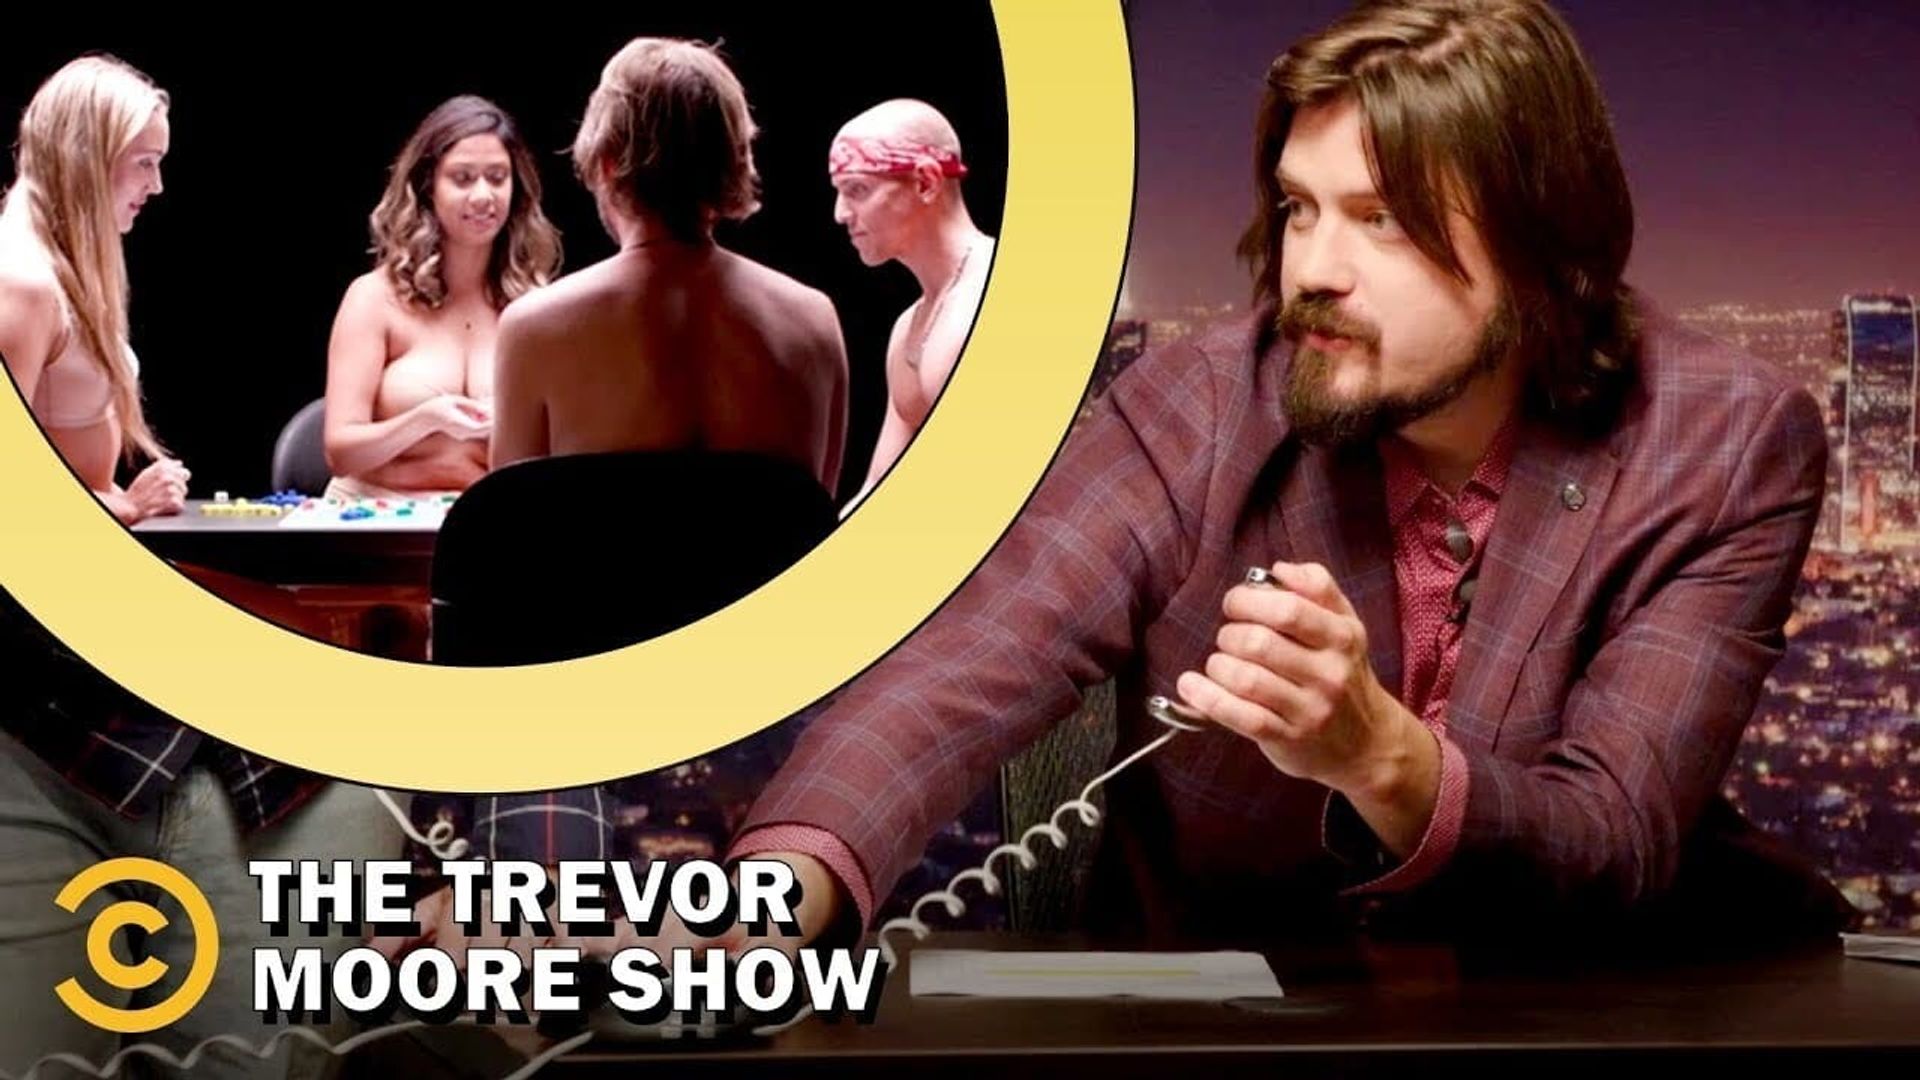 The Trevor Moore Show background